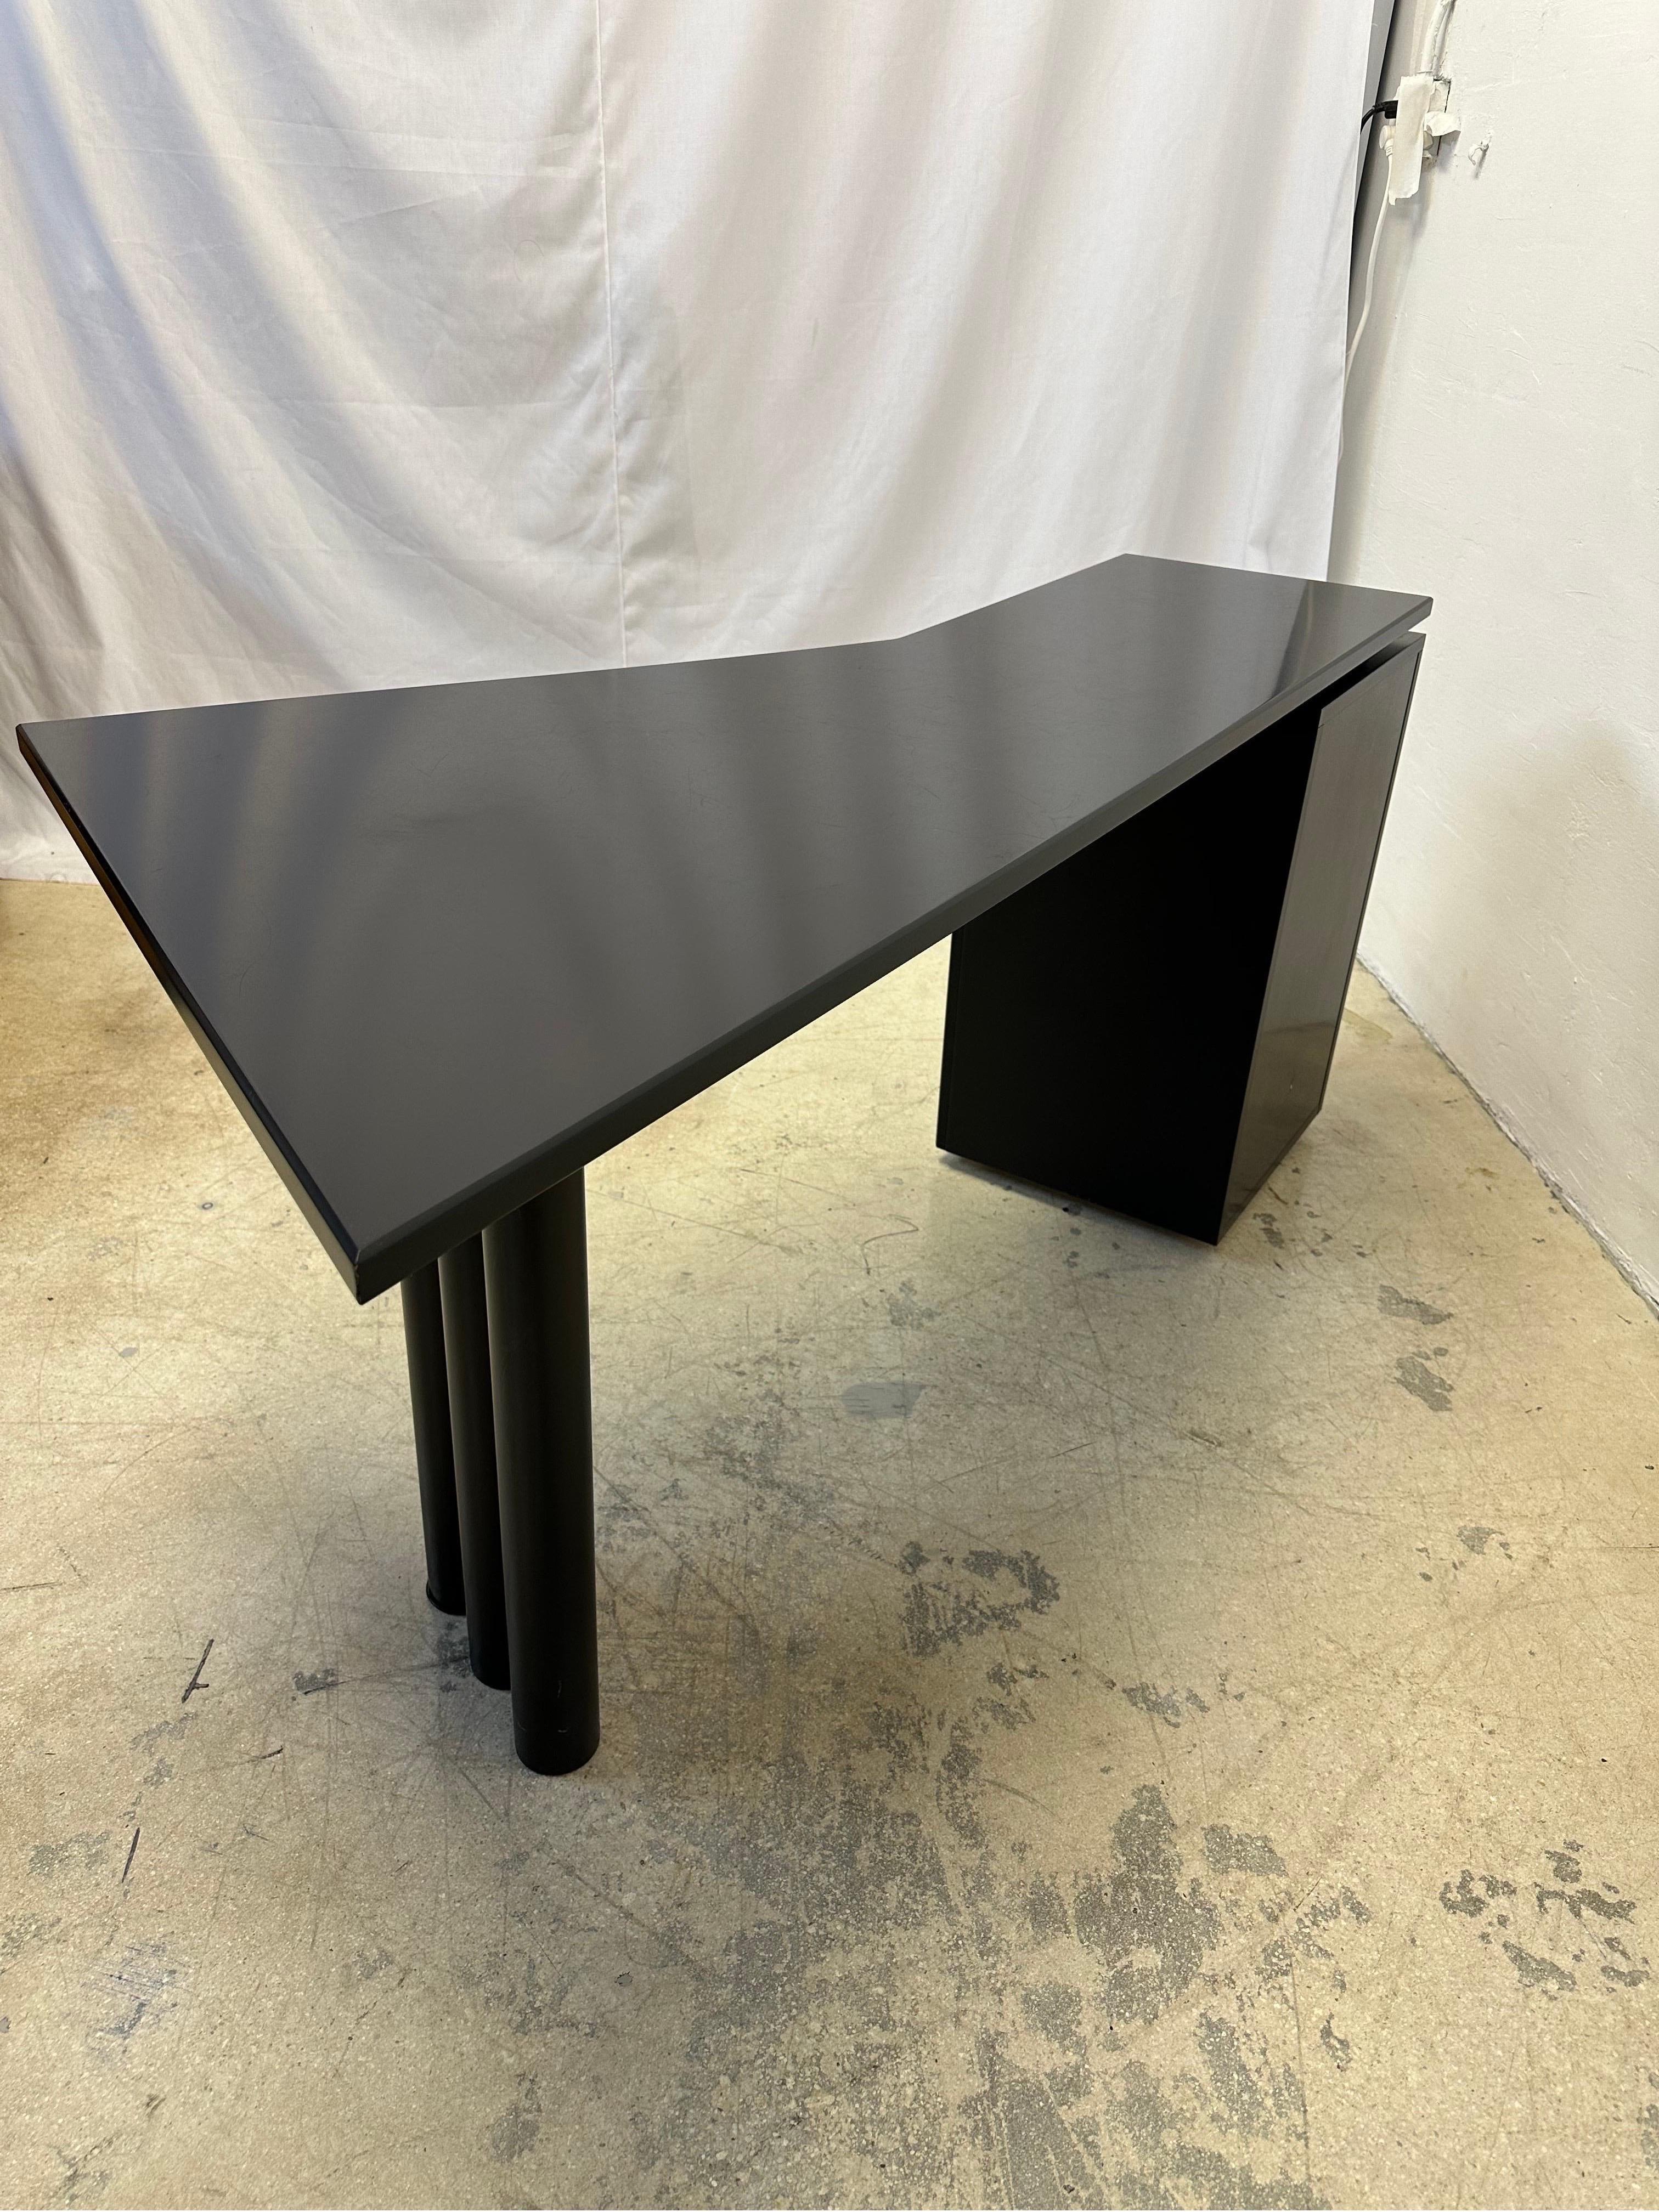 Postmodern Black Lacquered Desk by Interlubke, Germany 1980s For Sale 7